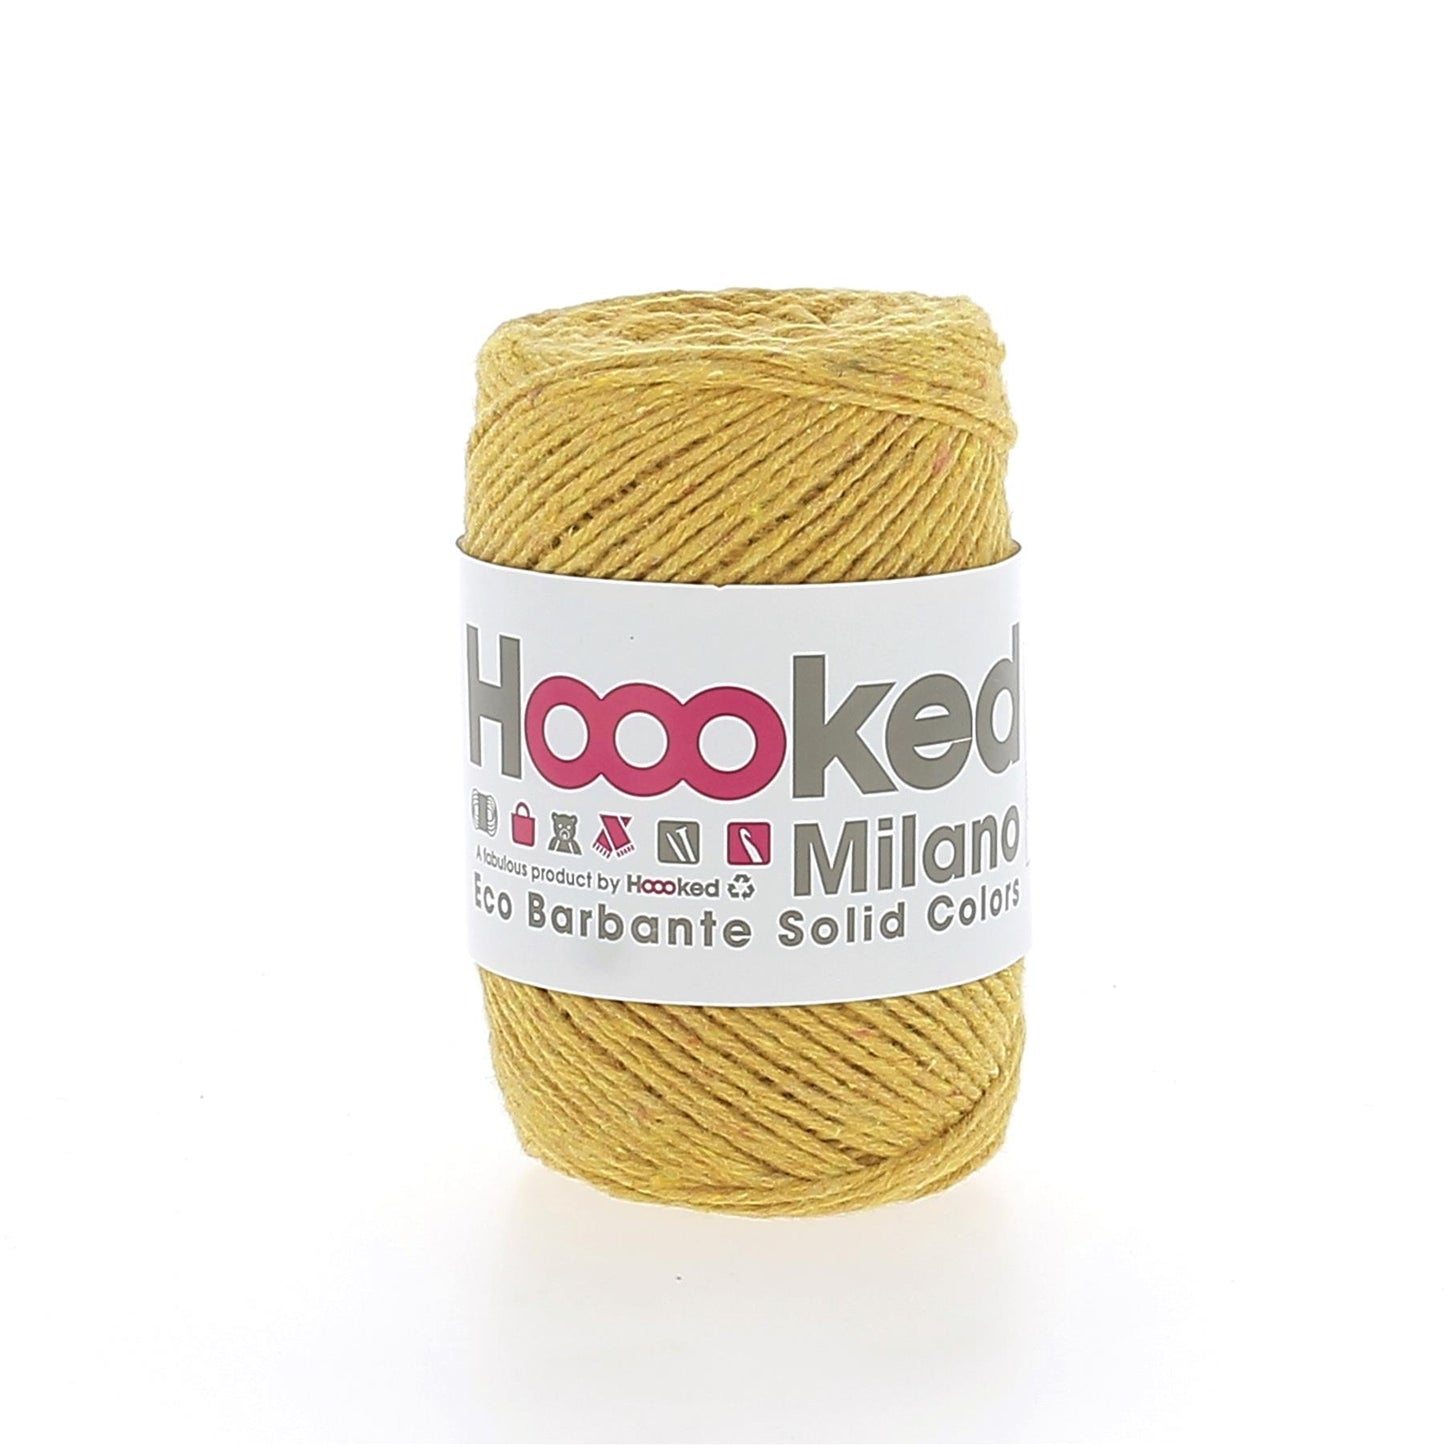 [Hoooked] D470 Eco Barbante Milano Curry Cotton Yarn - 102M, 100g